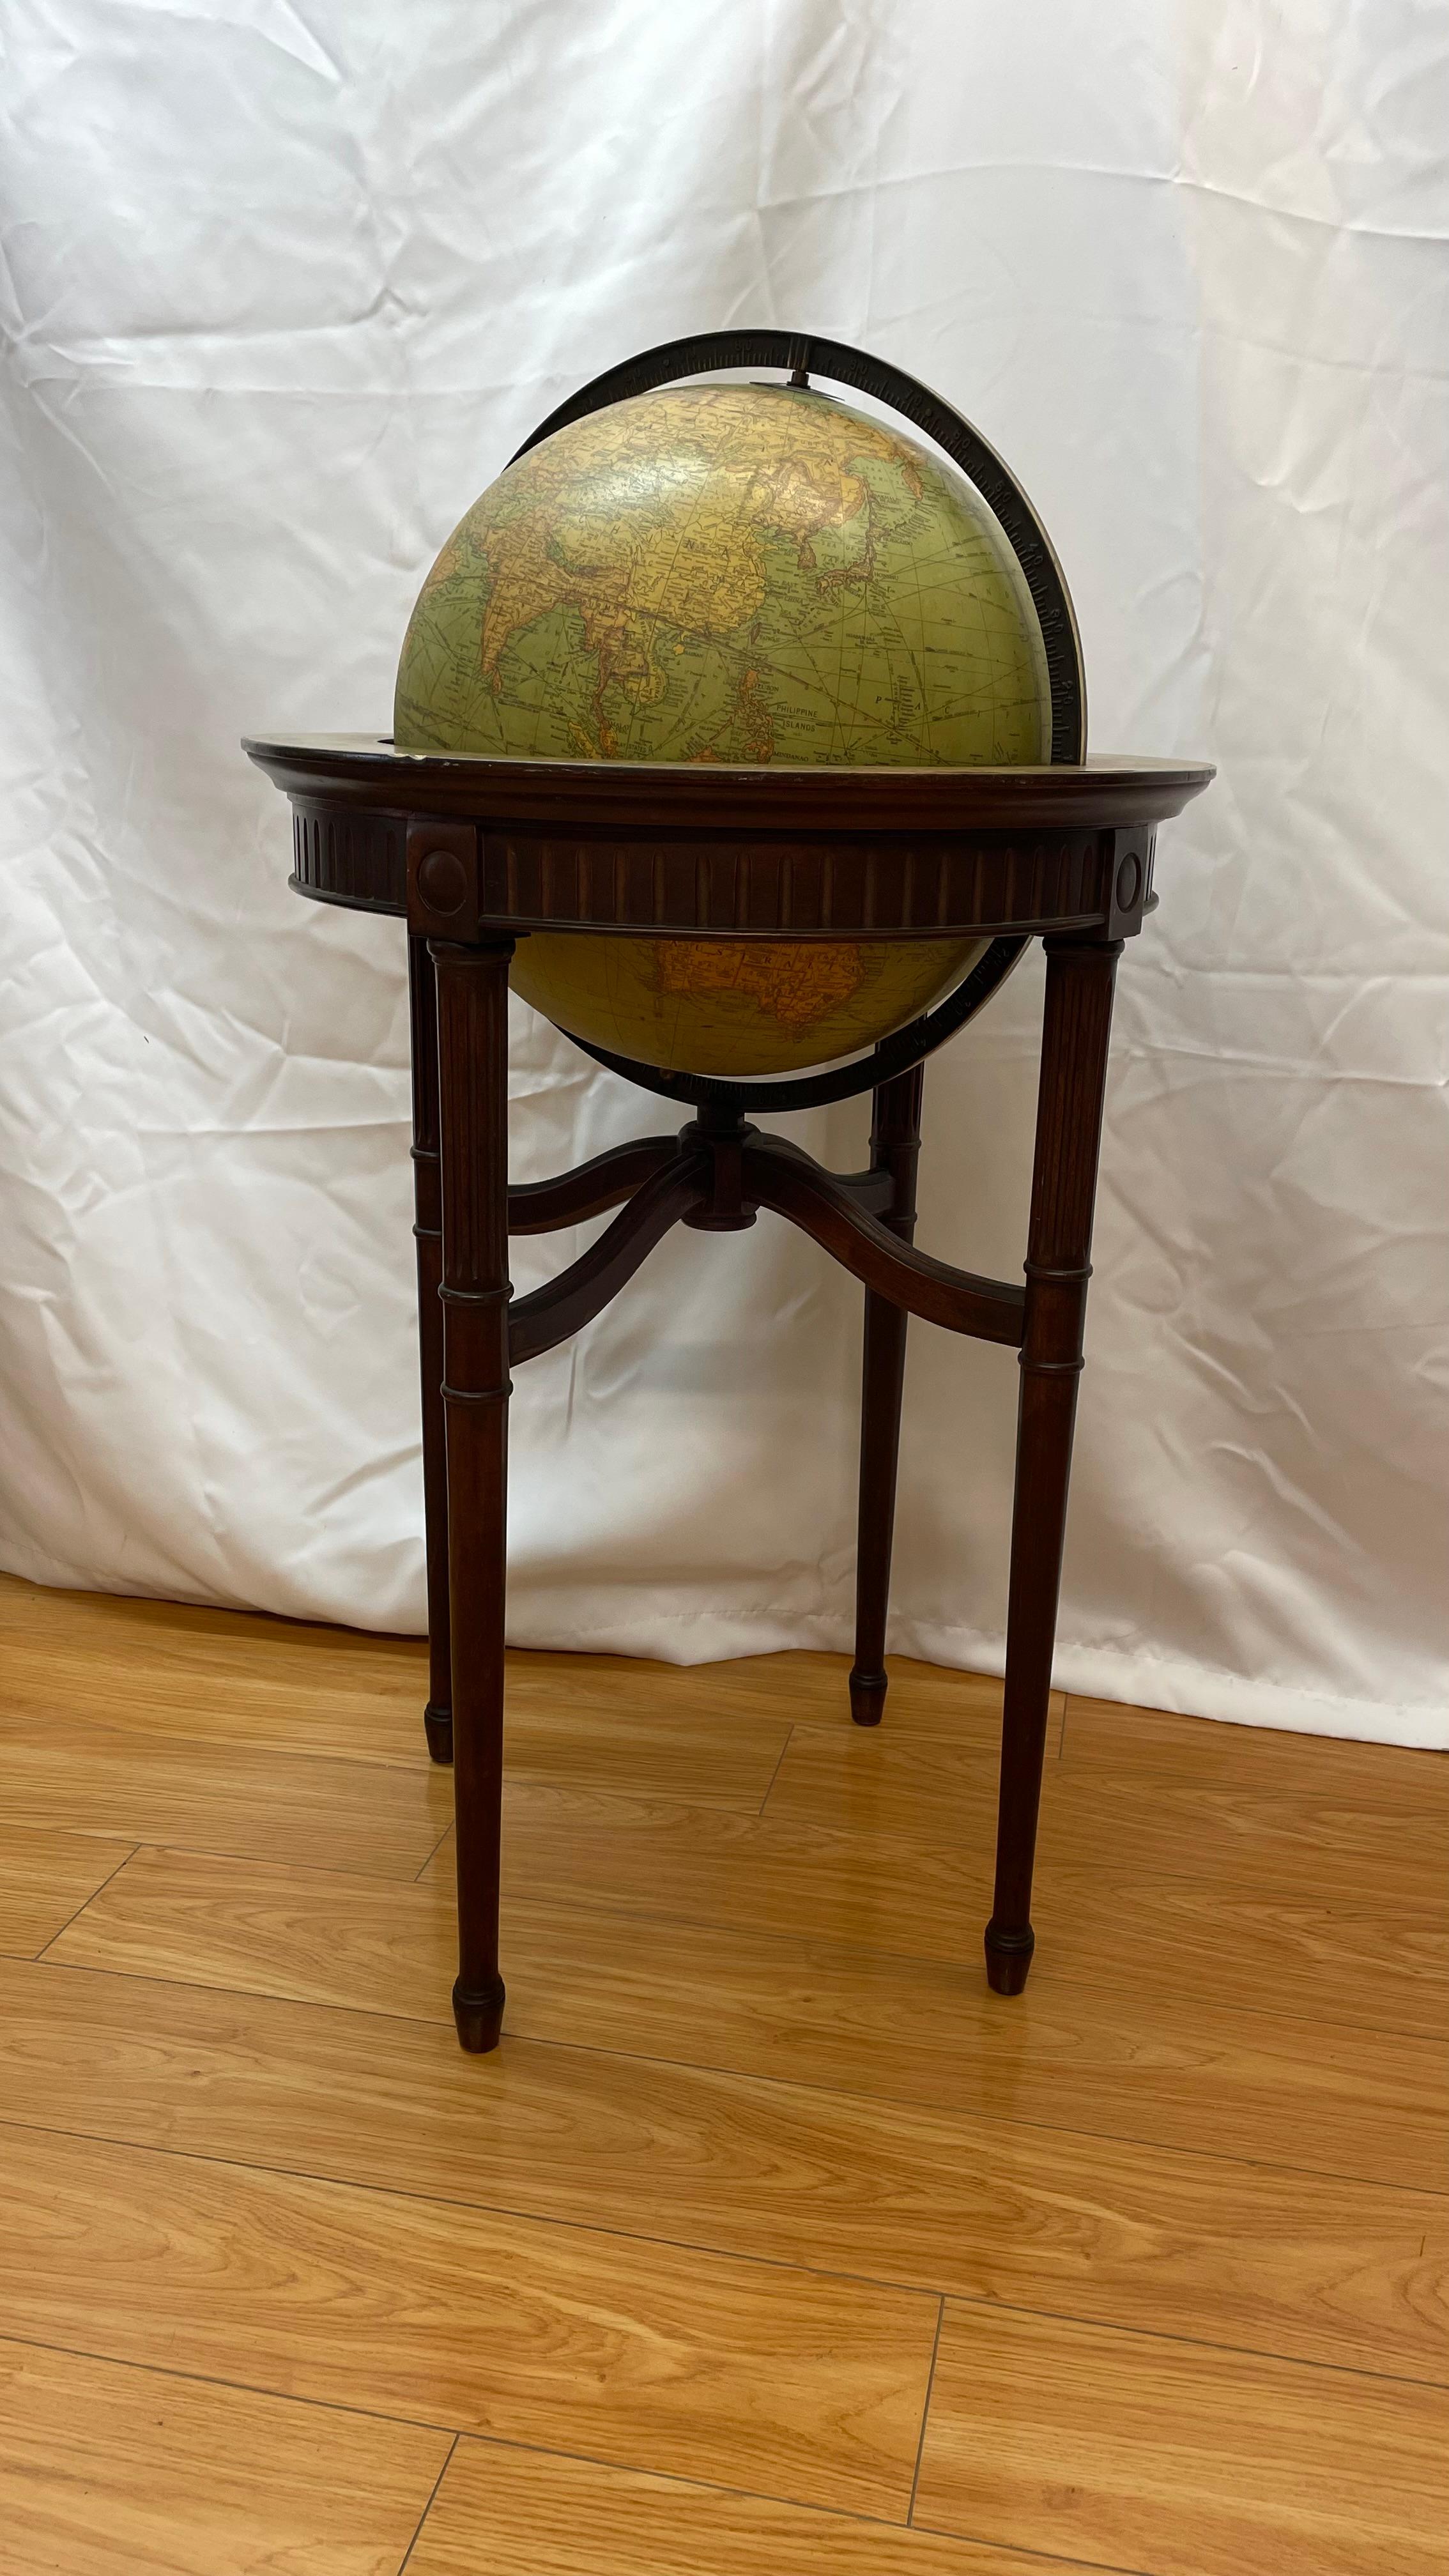 Terrestrial Library Globe Replogle Chicago w/Astrological Banded Stand 1